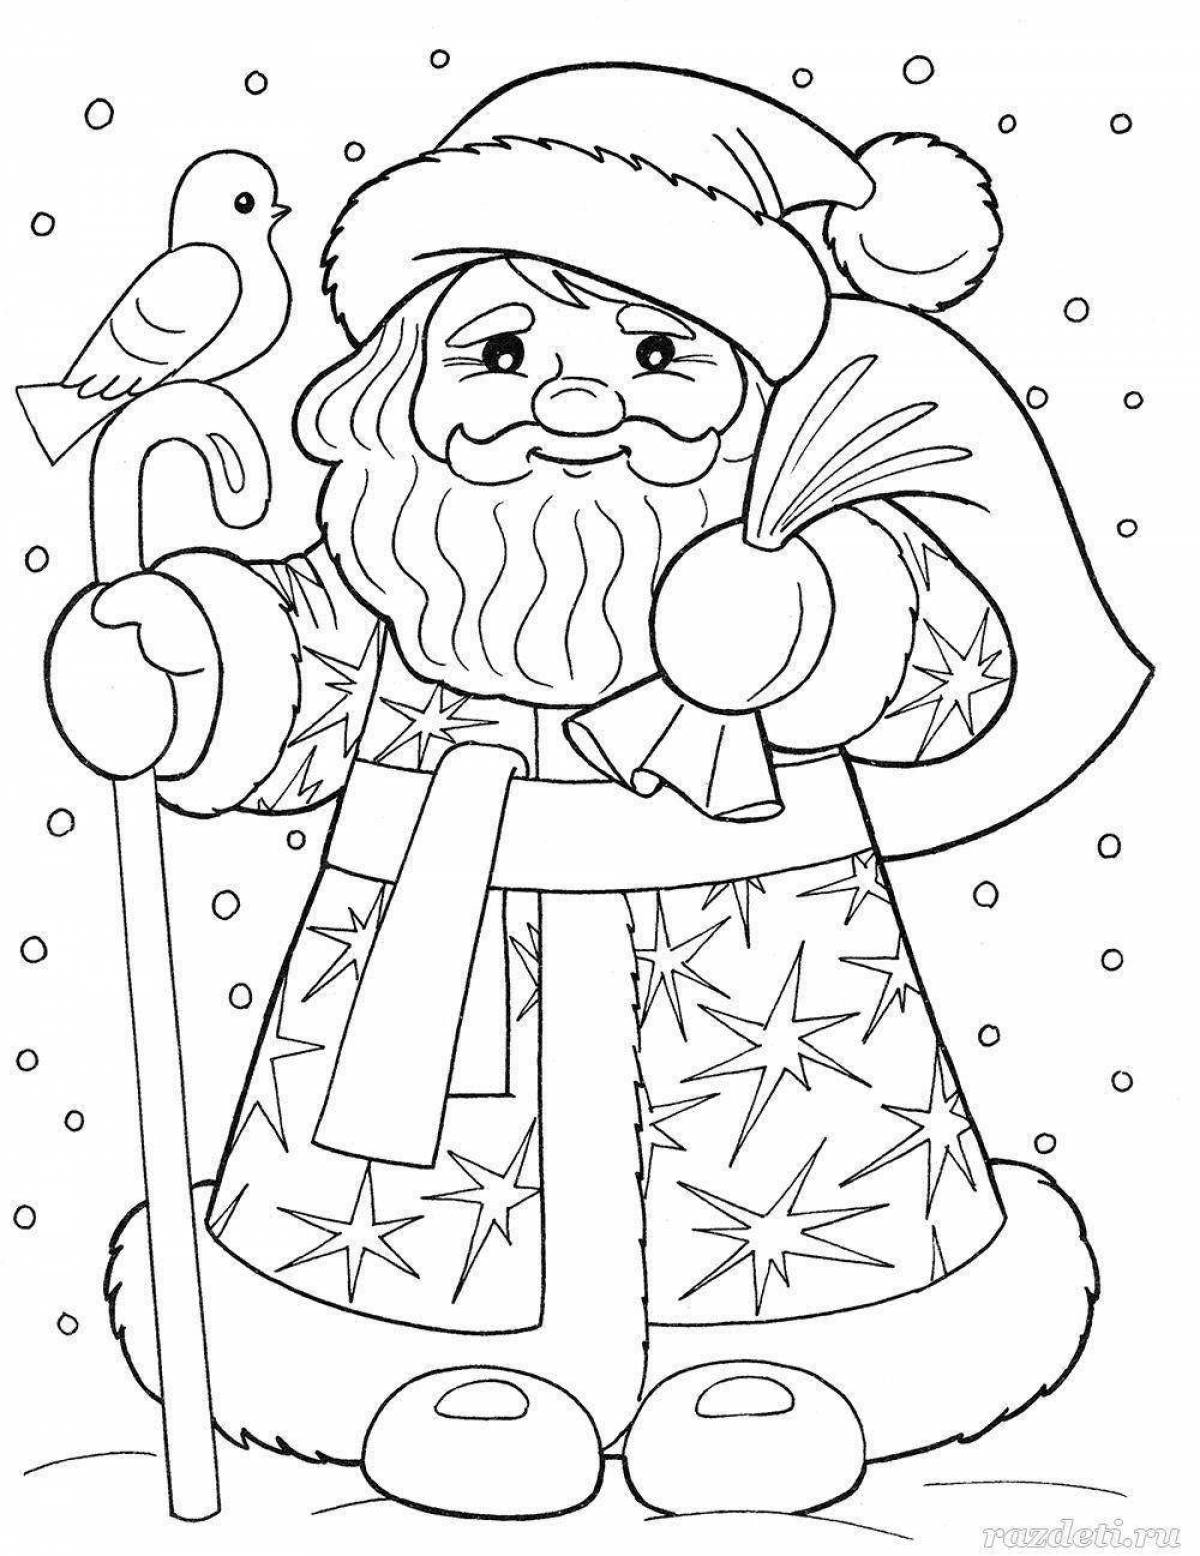 Animated coloring santa claus for kids